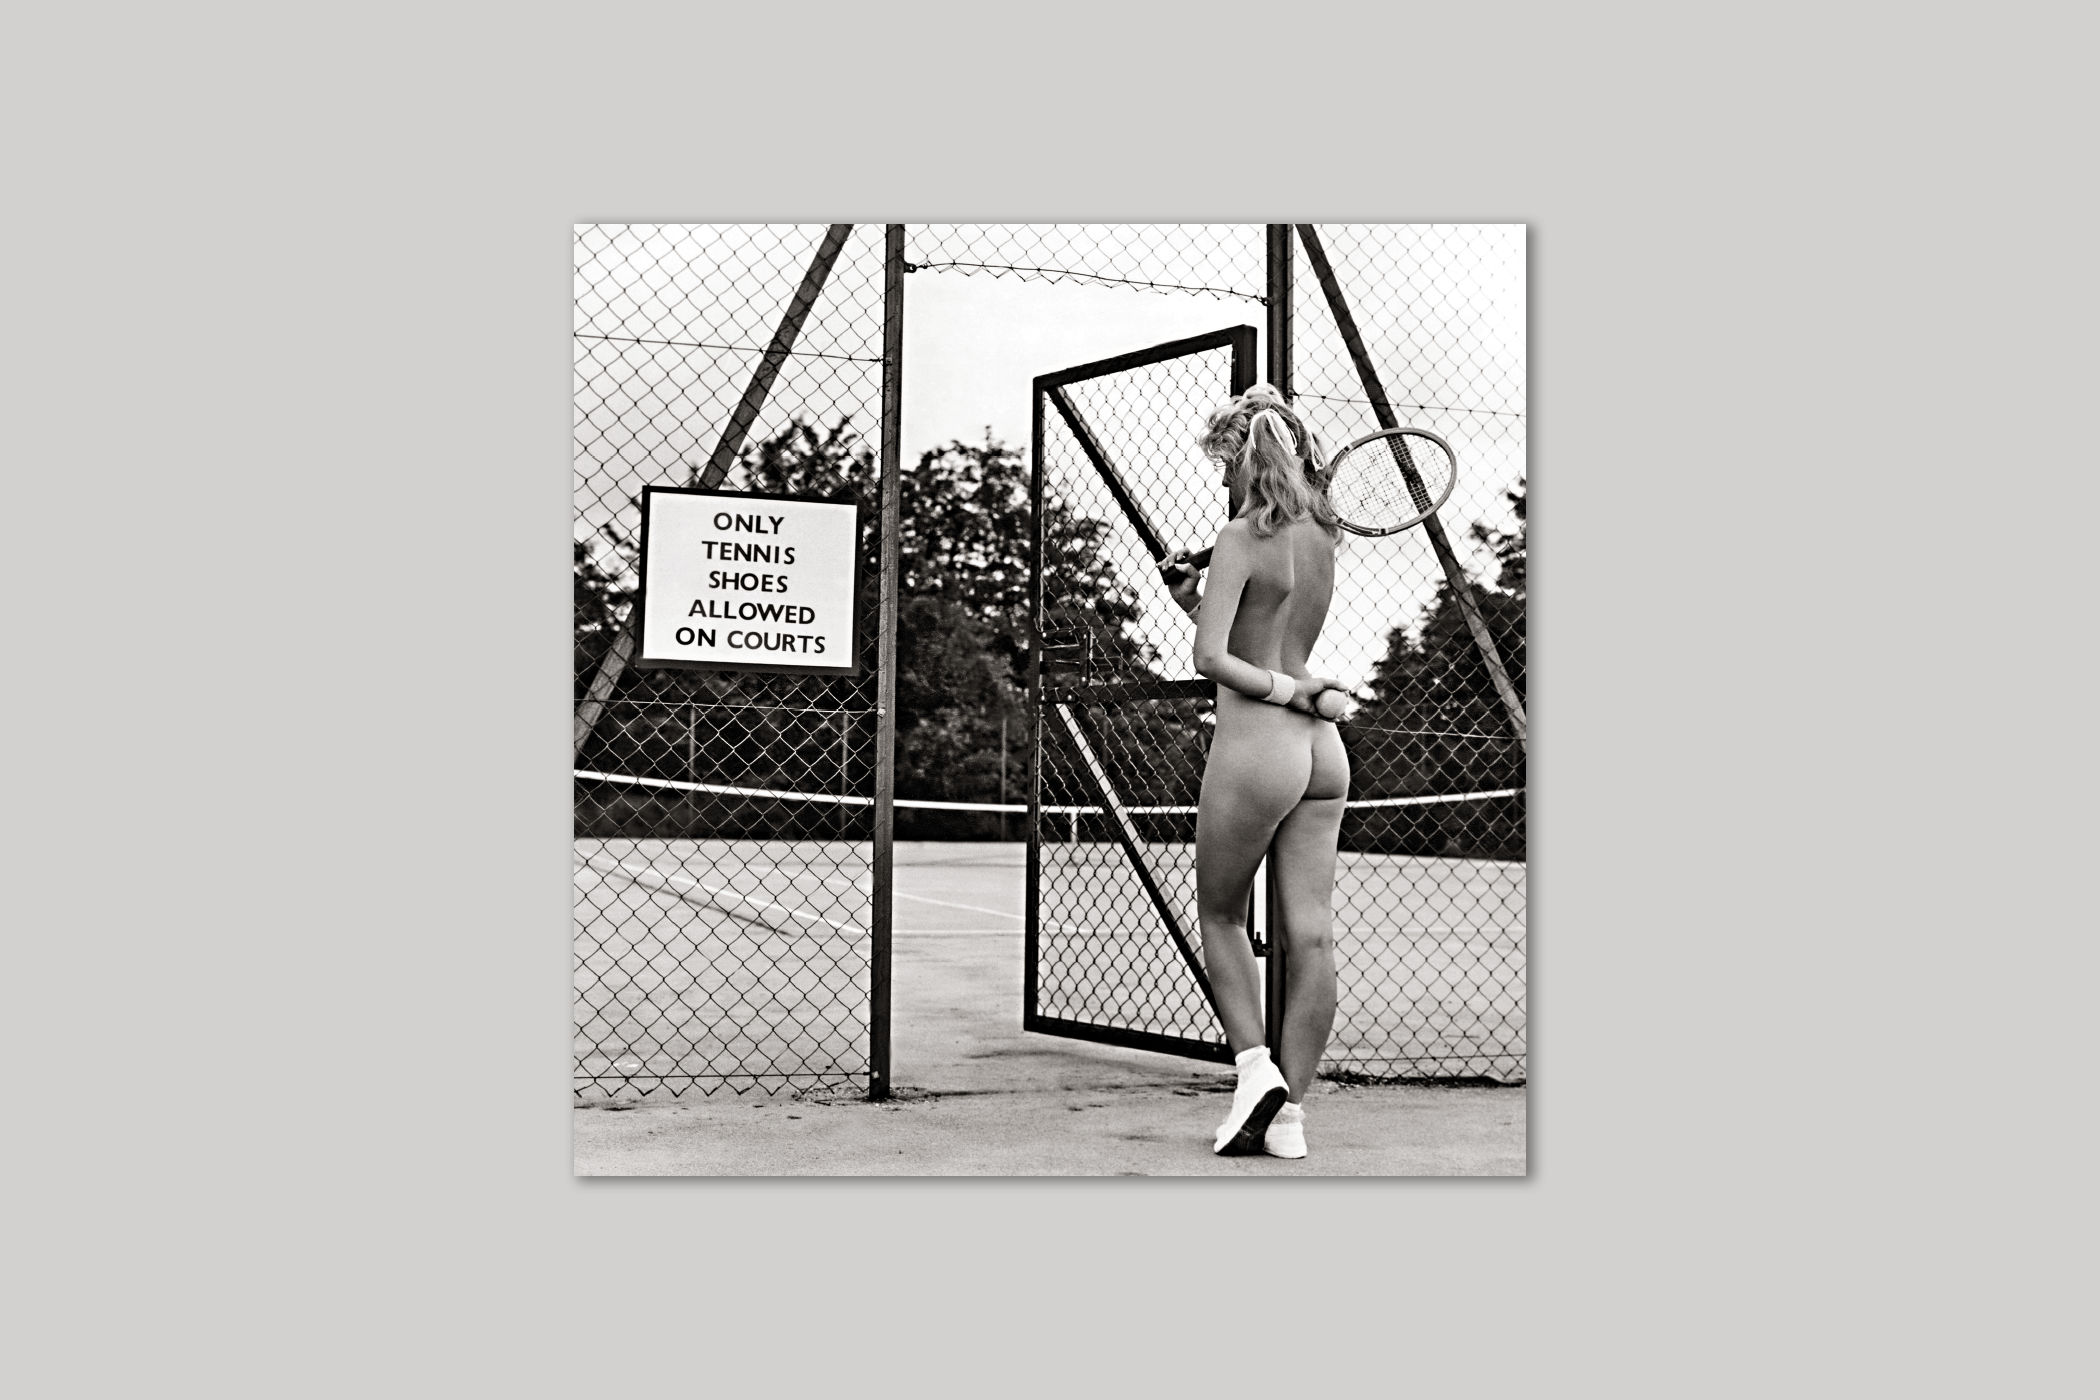 Tennis Anyone? retro photograph from Exposure range of photographic cards by Icon.